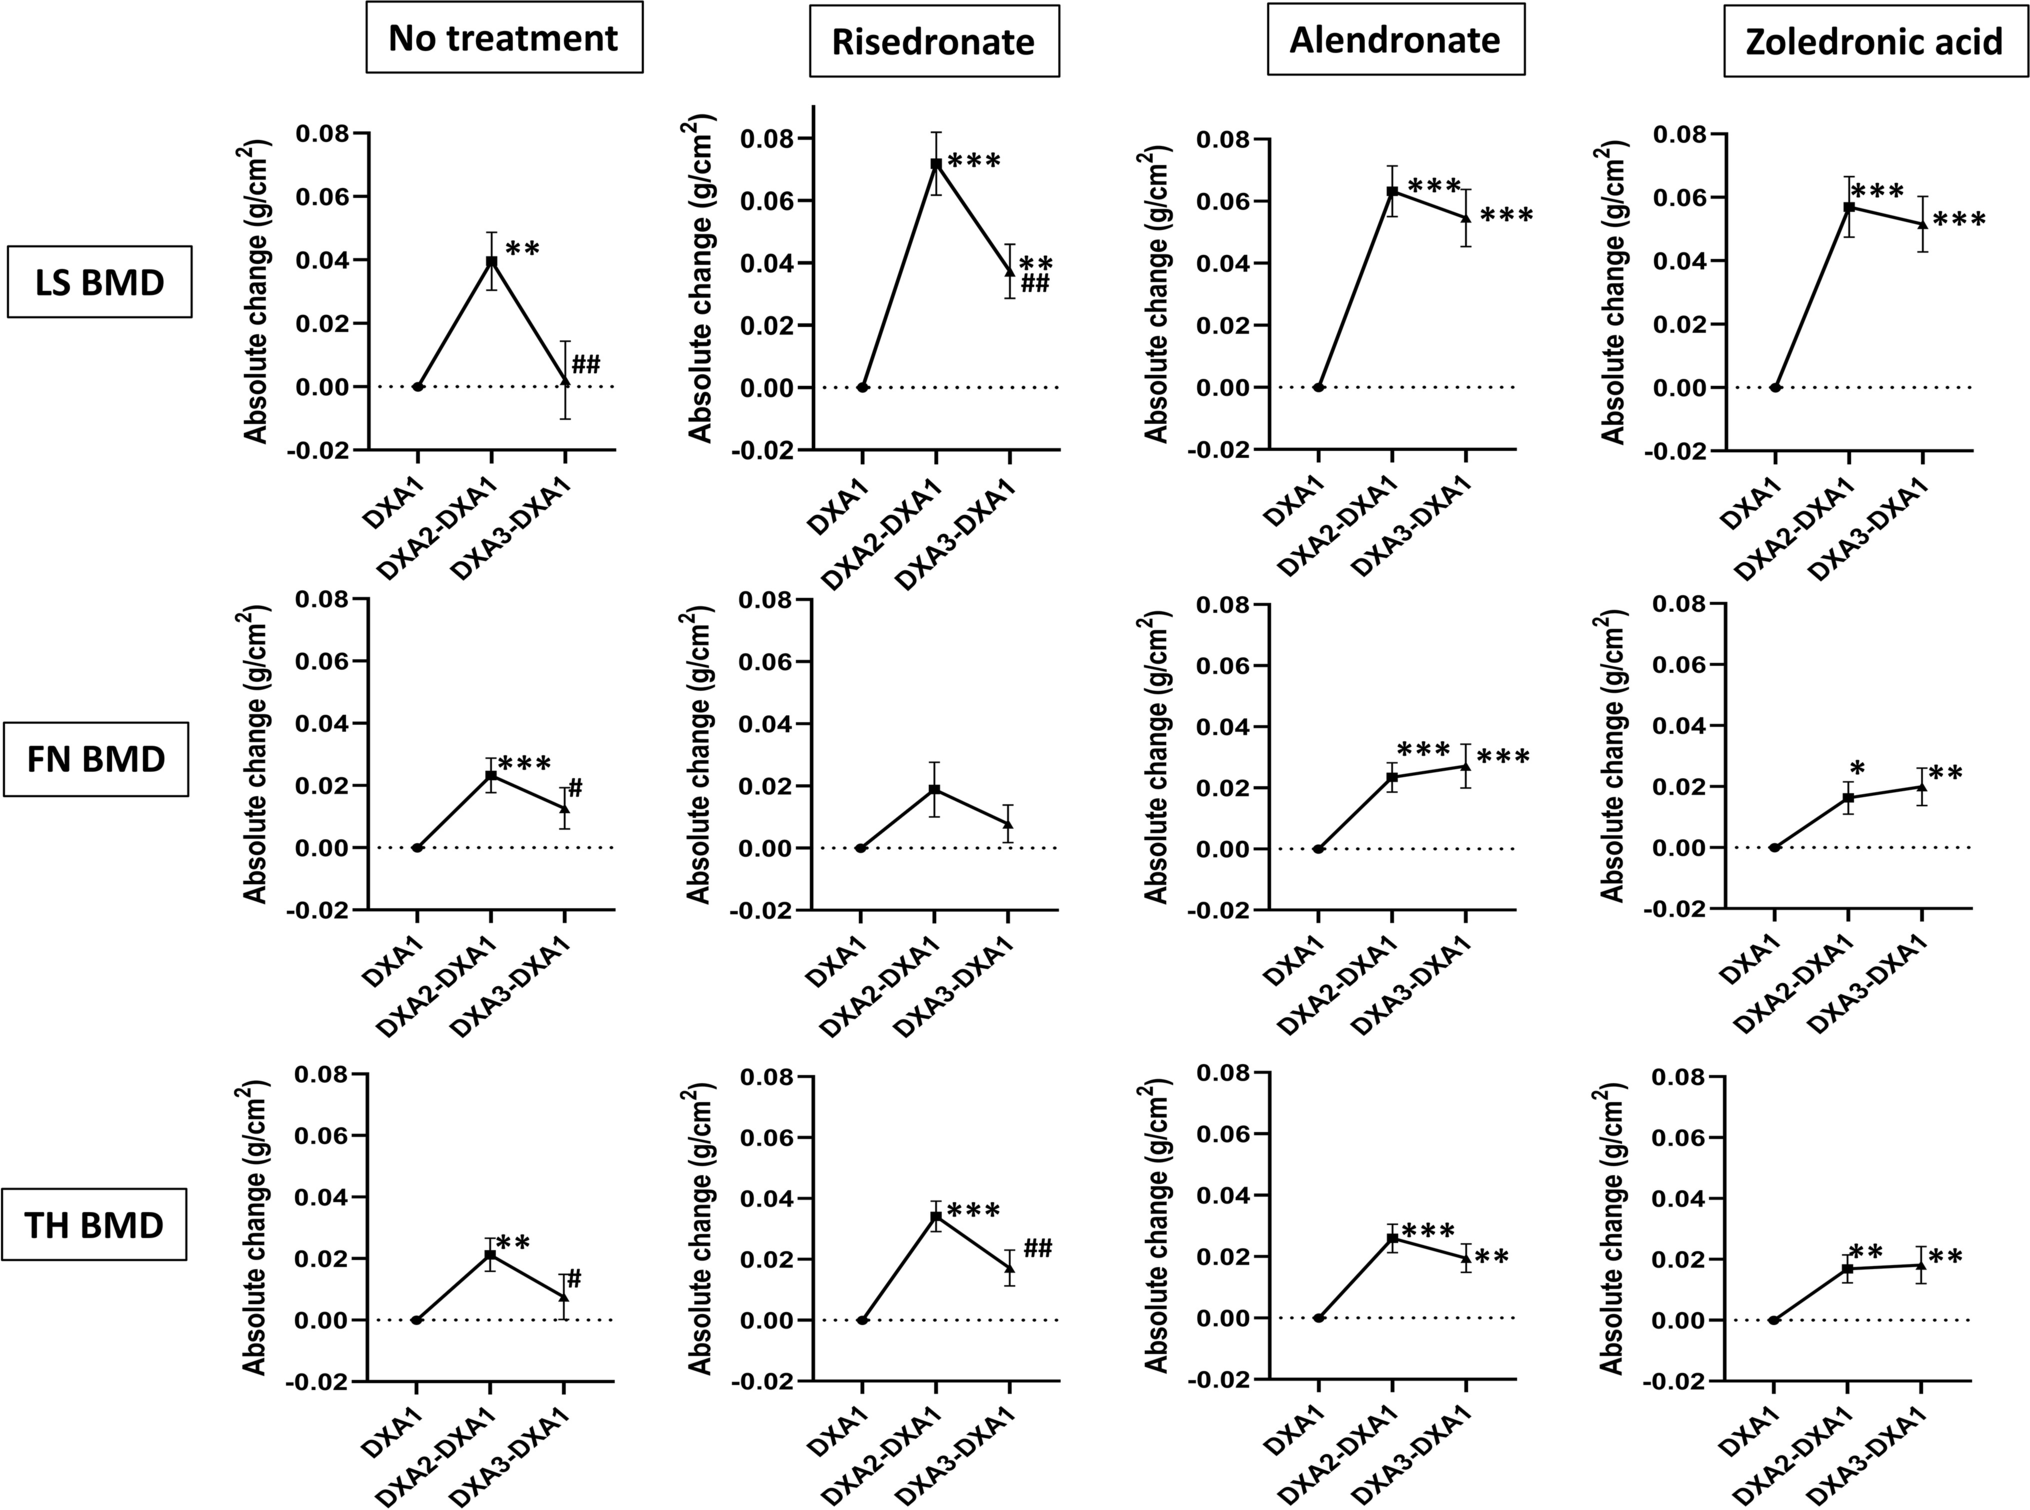 Graphs depicting absolute change (mean ± SEM) in LS, FN, and TH BMD during denosumab treatment and after receiving no subsequent therapy or received subsequent treatment with risedronate, alendronate, or zoledronic acid. From "Bone loss after denosumab discontinuation is prevented by alendronate and zoledronic acid but not risedronate: a retrospective study."